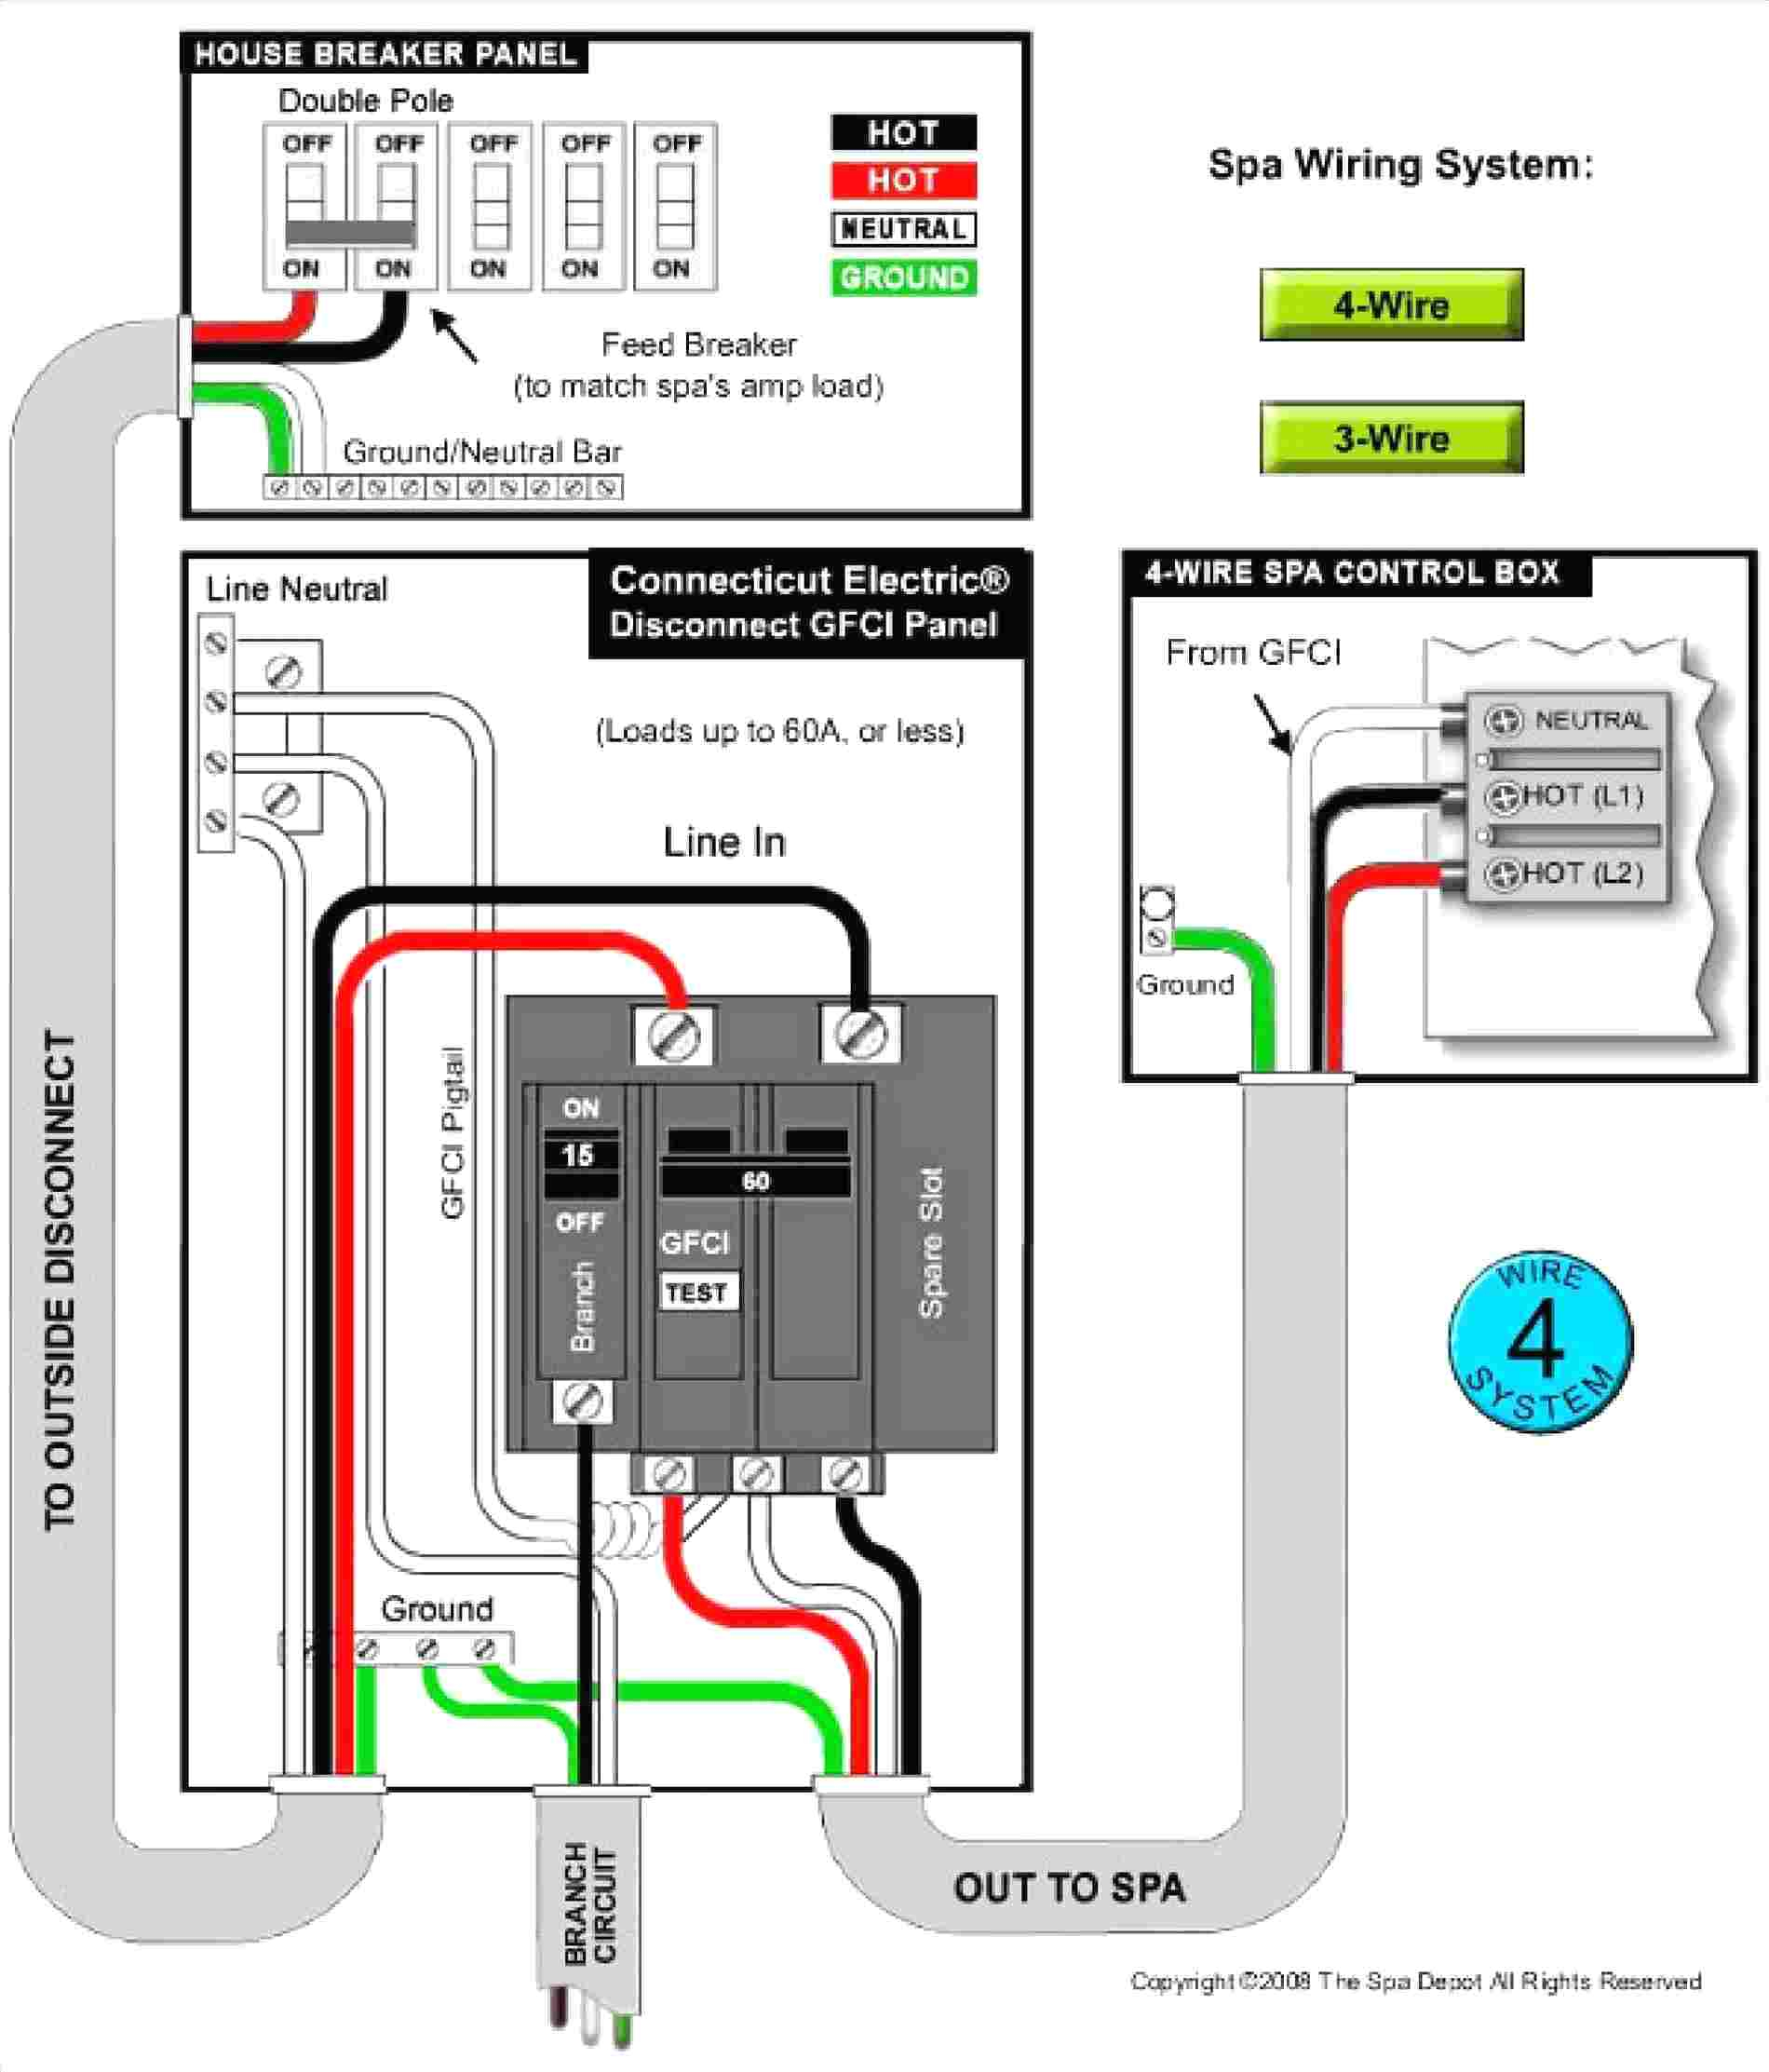 Sub Panel Wiring Diagram Sub Panel Wiring Diagram Wiring Diagram Review